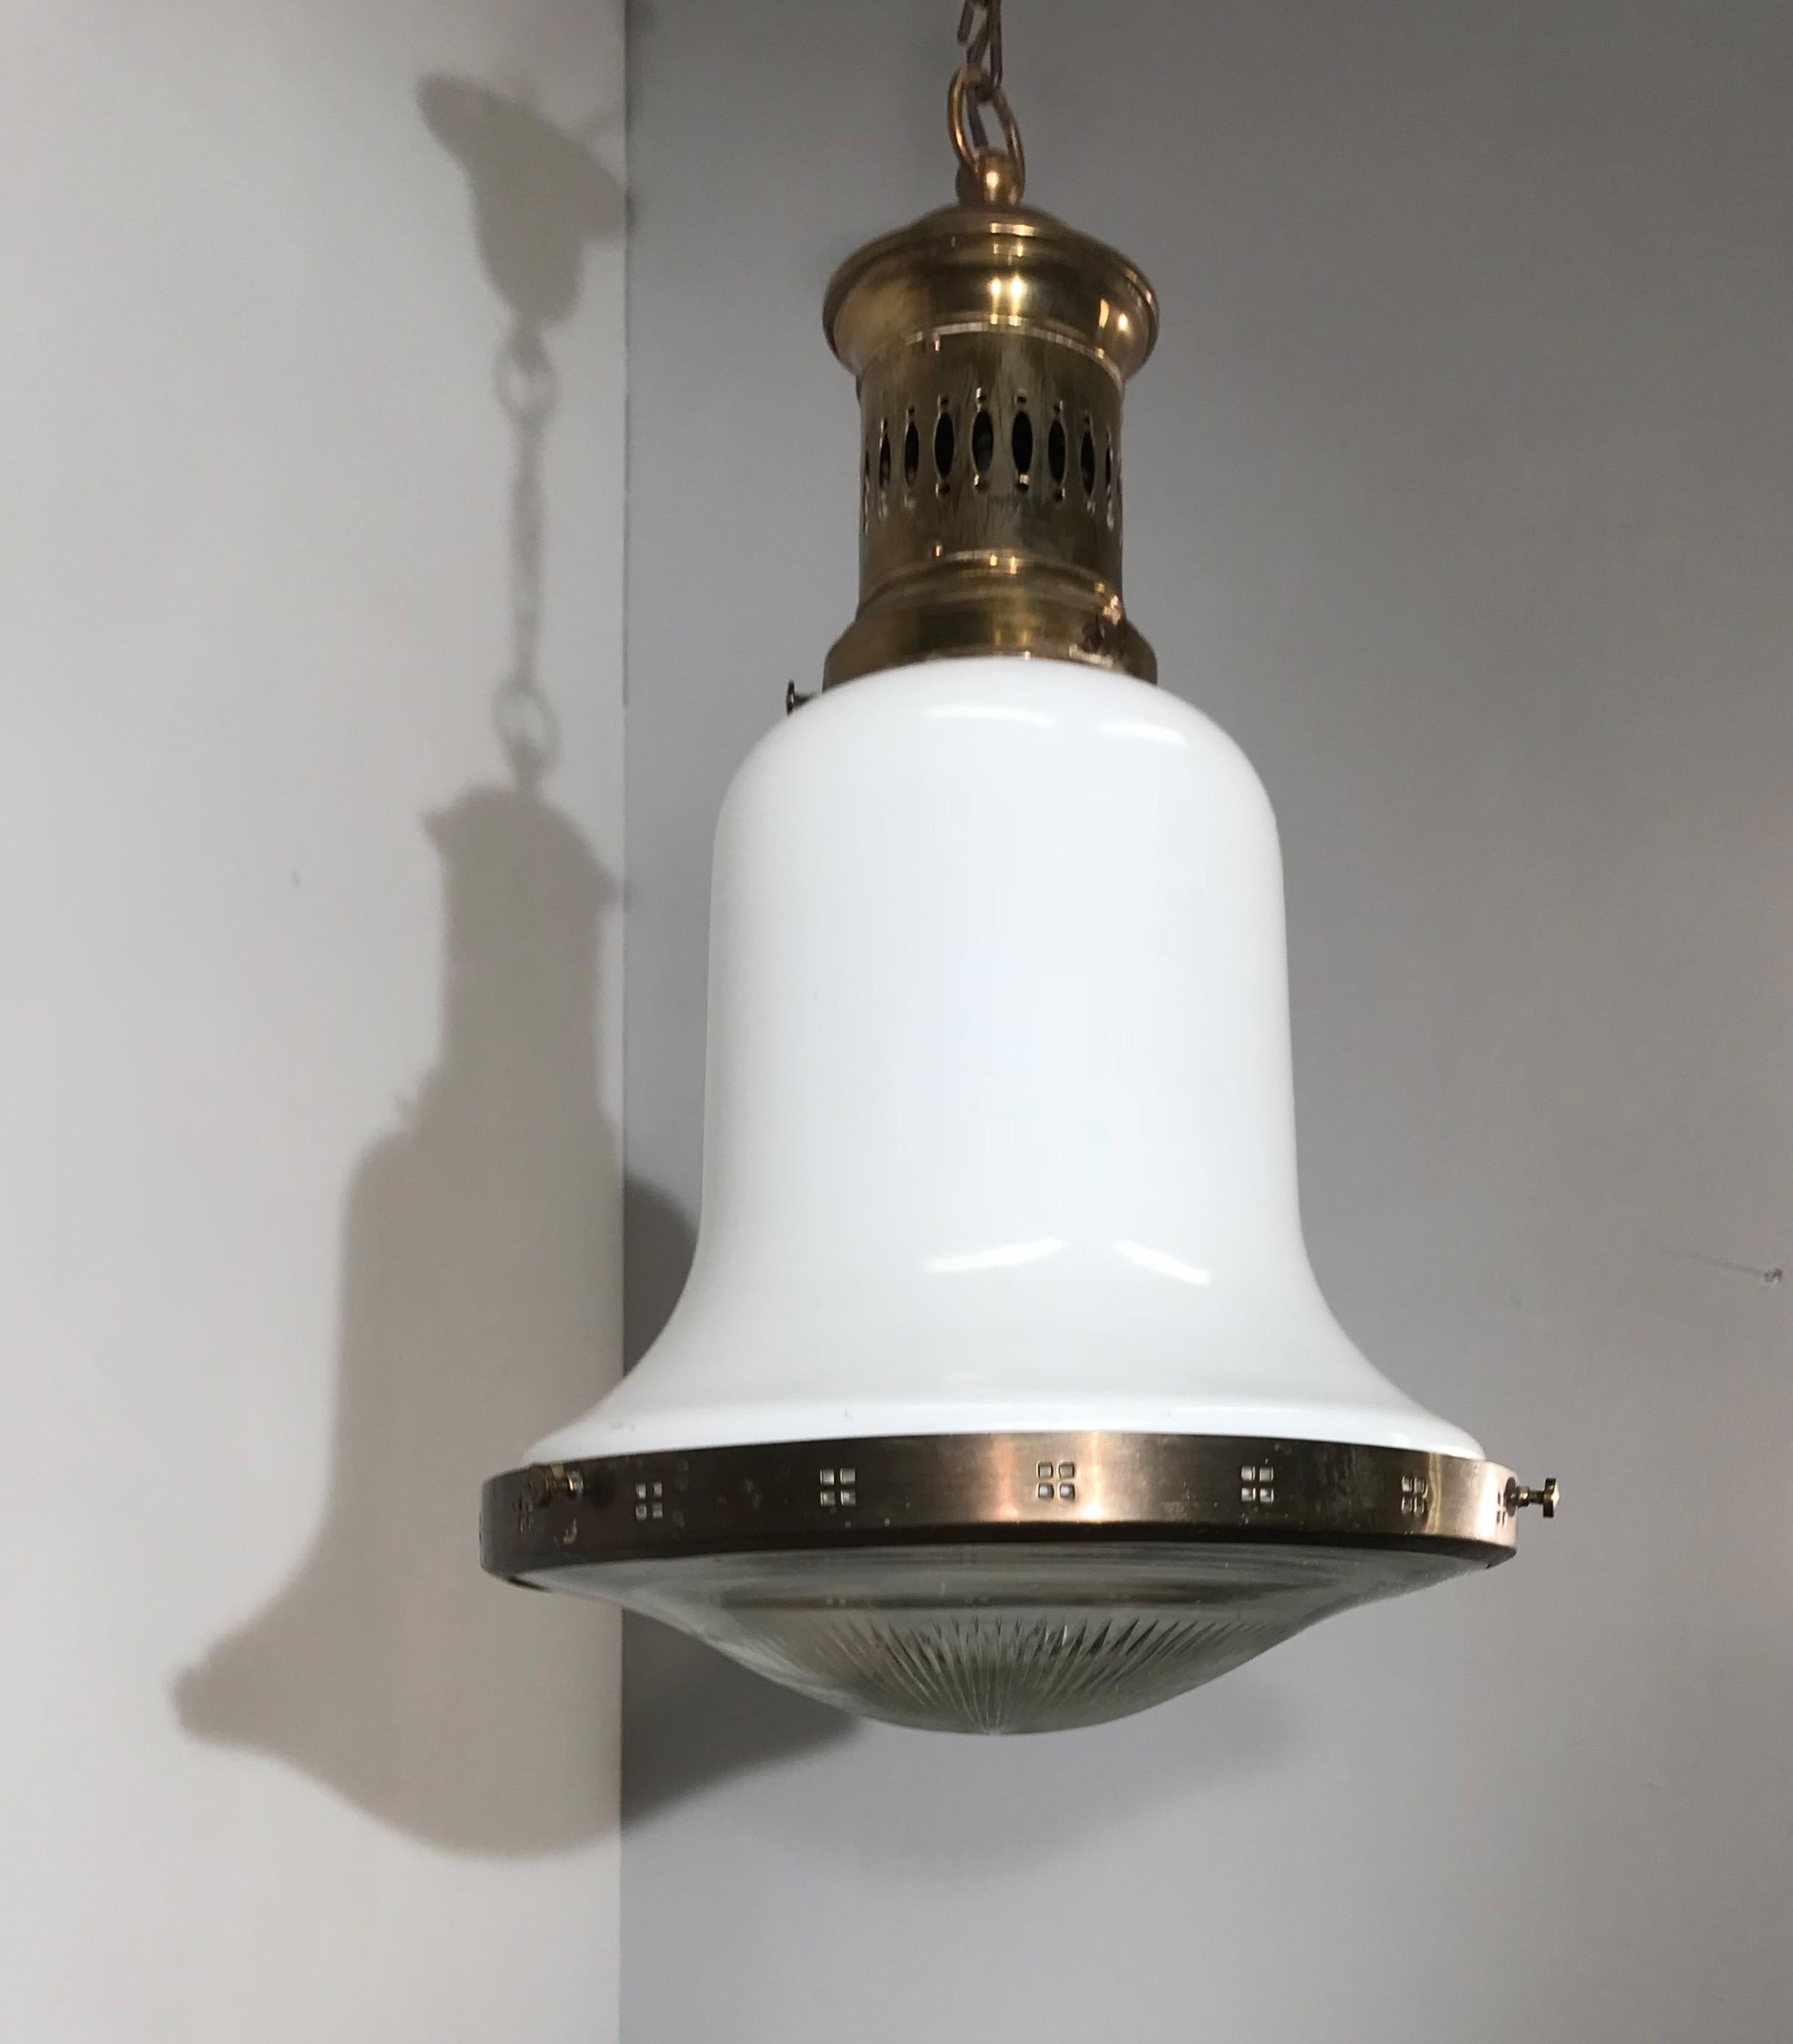 Good size 1920s Bauhaus style light fixture with original chain and canopy. 

This stunning and rare, bell shaped pendant is in very good to excellent condition and this timeless piece of lighting art can be used in many kinds of interiors. The two